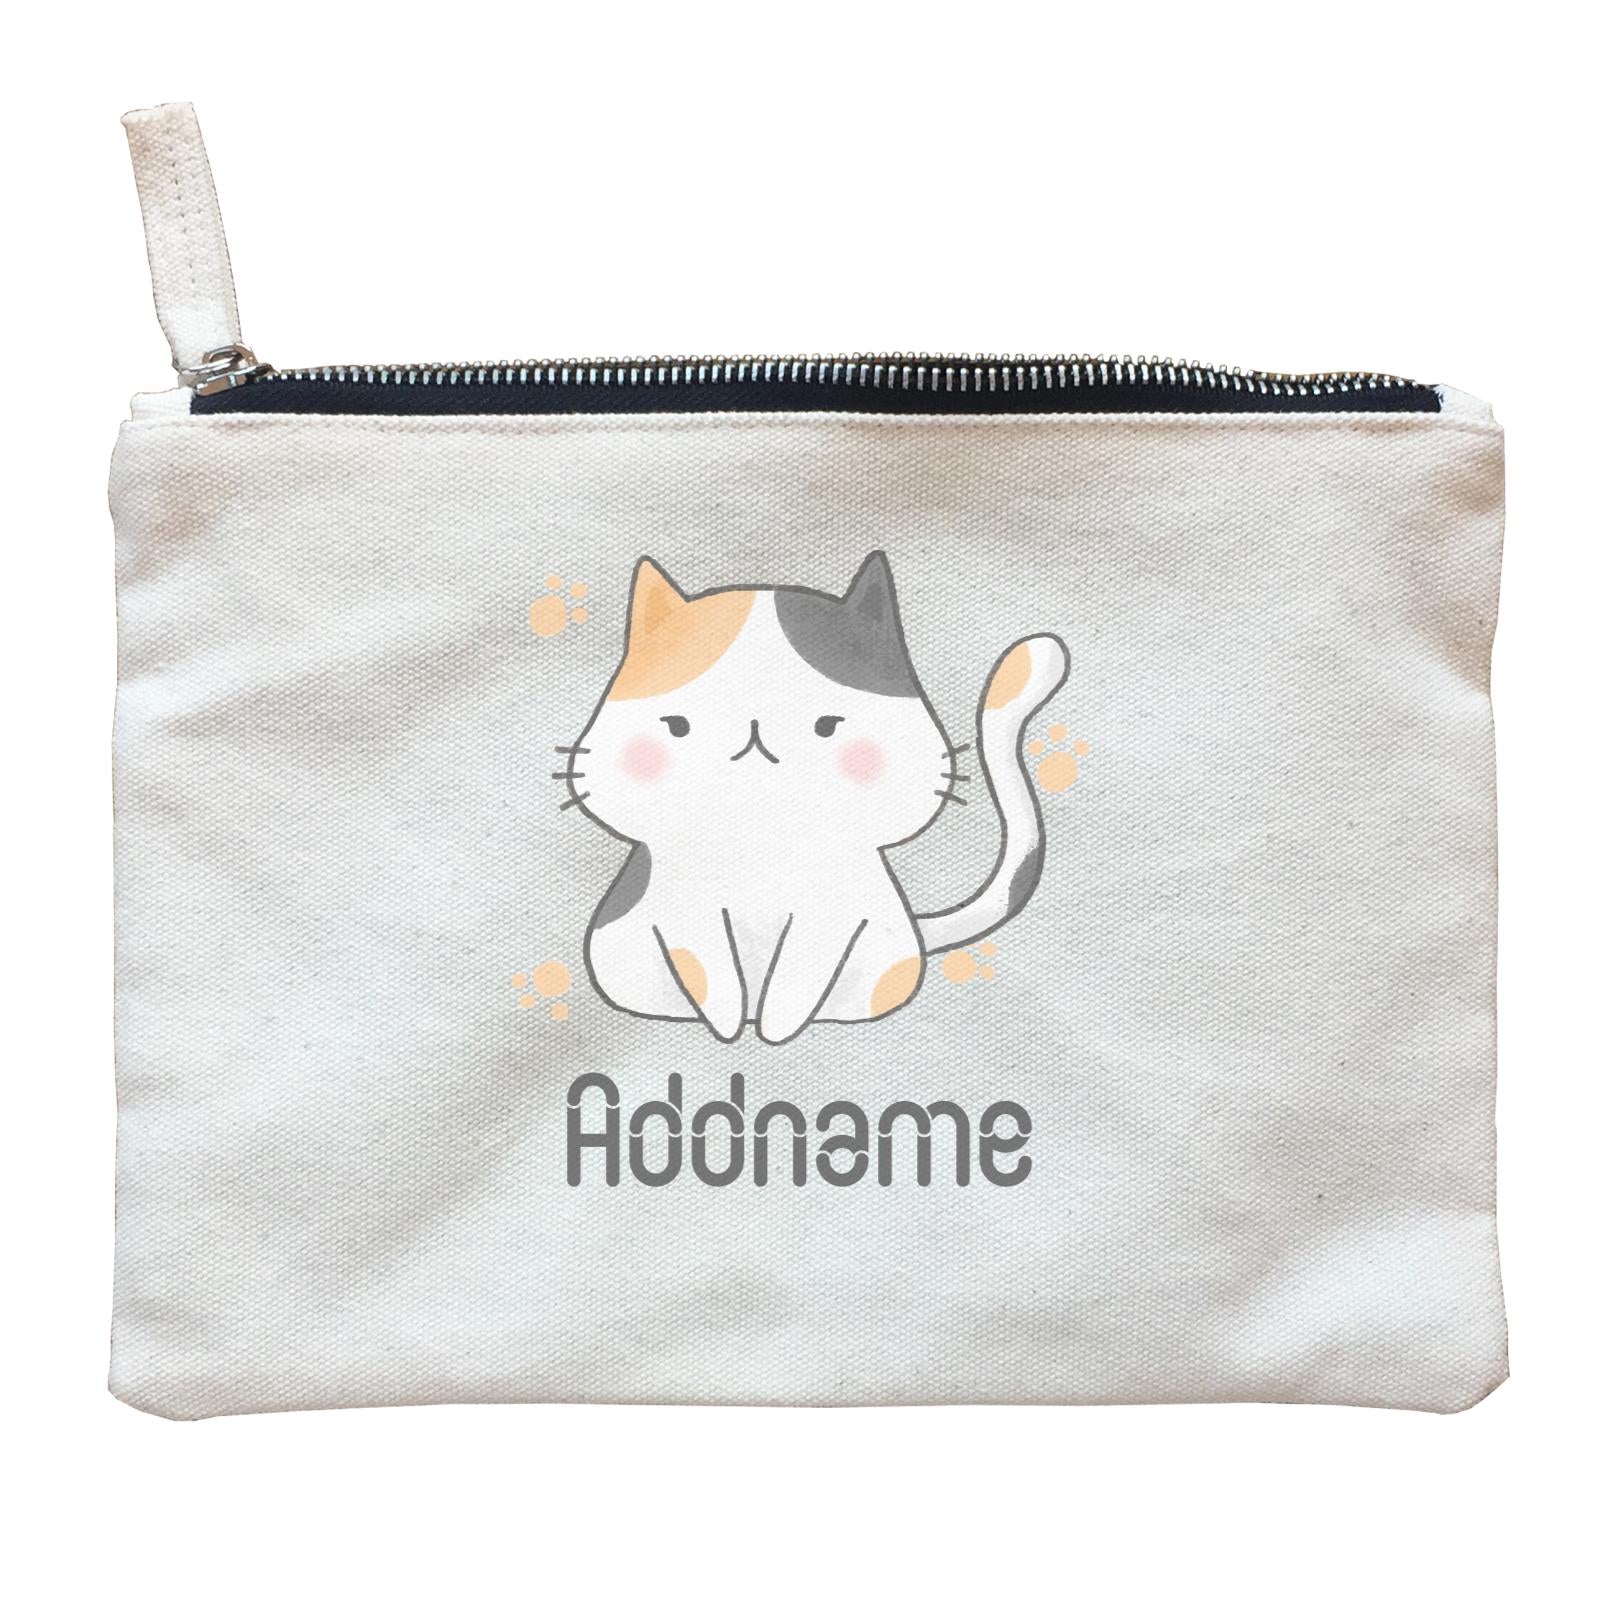 Cute Hand Drawn Style Cat Addname Zipper Pouch